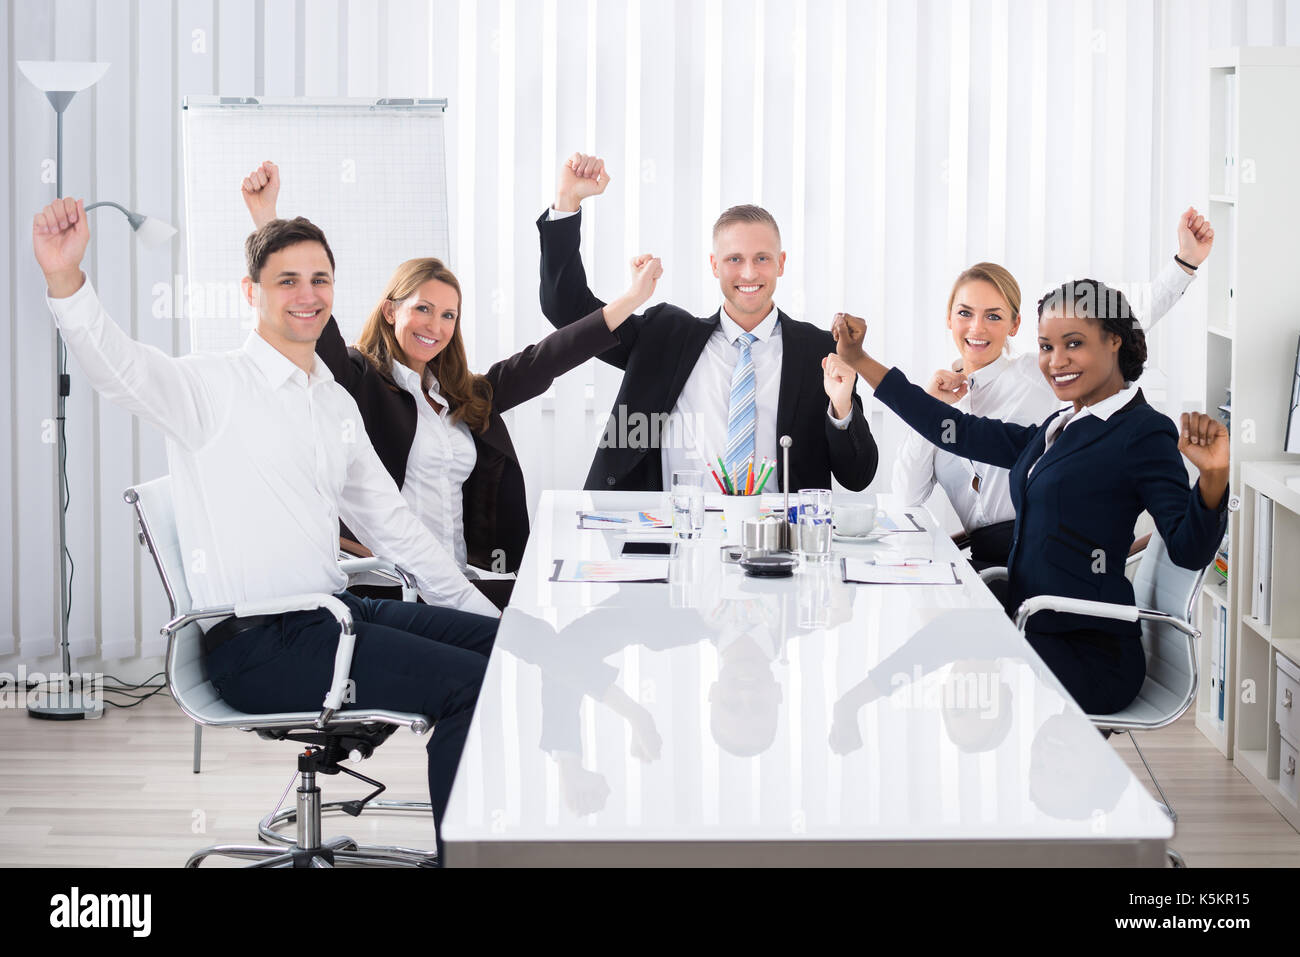 Group of smiling multi ethnic woman raising arms in office Banque D'Images